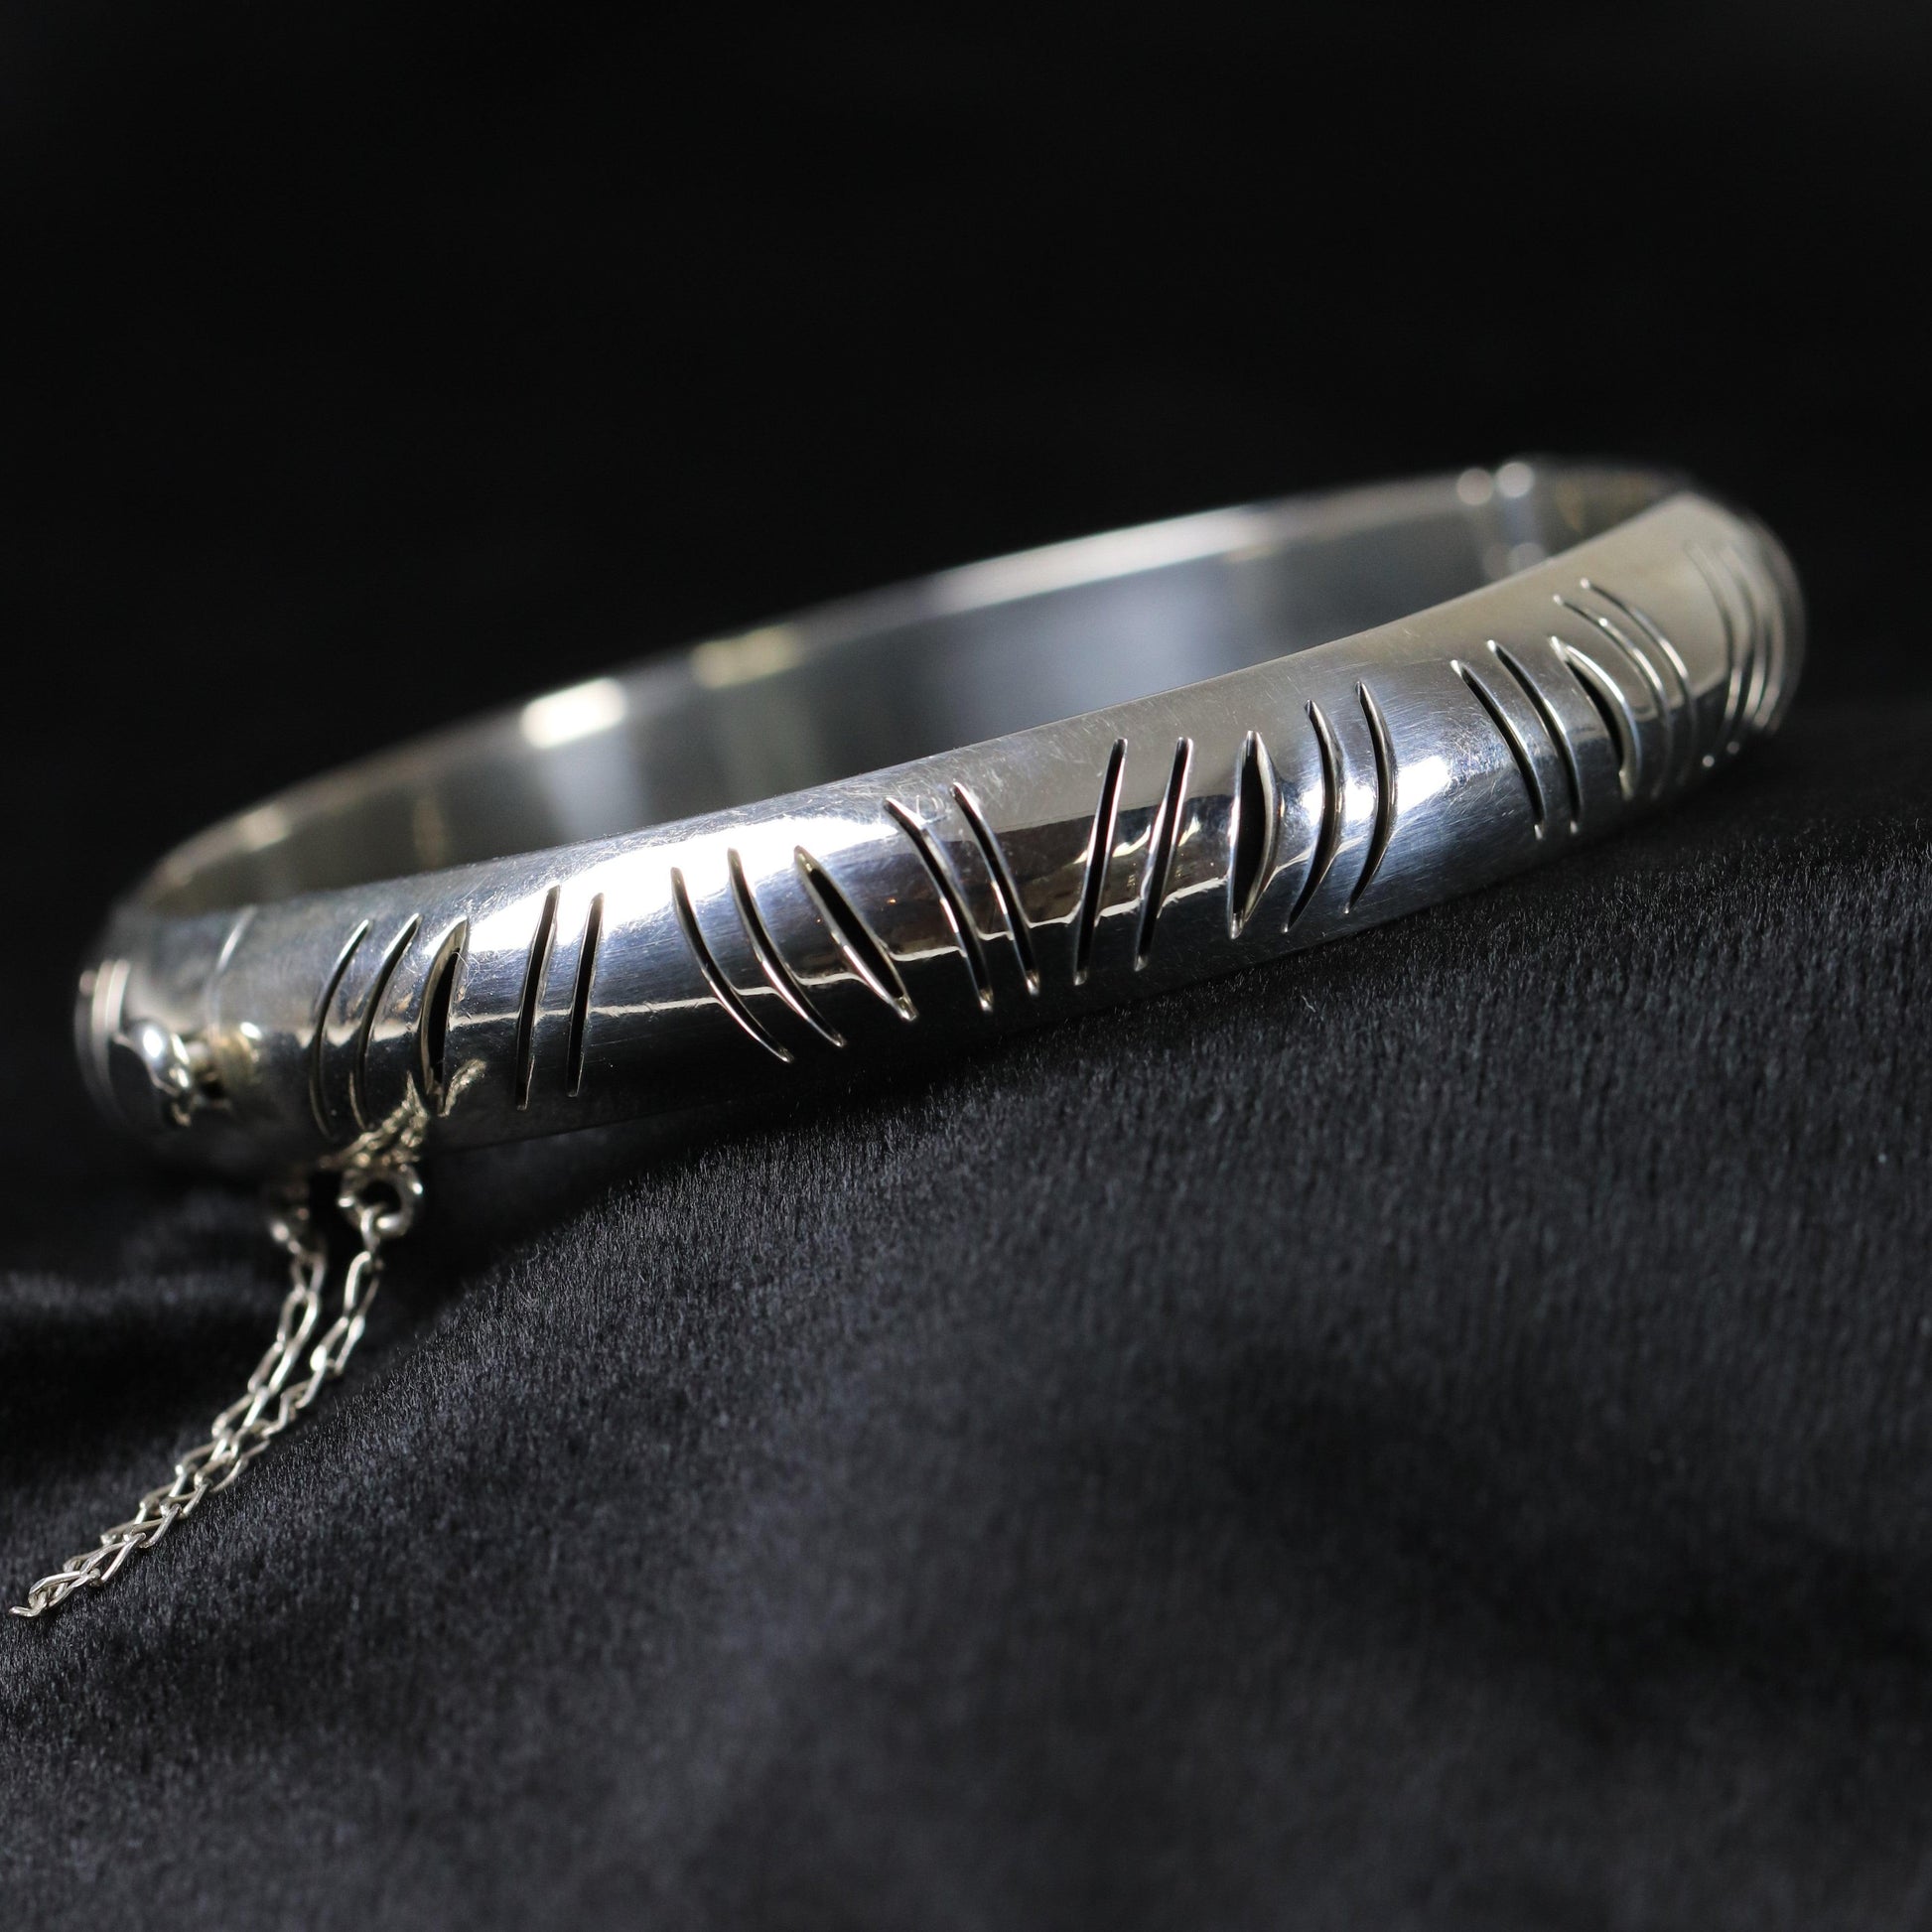 Vintage Silver Mexican Jewelry | Handcrafted Shadow Bangle Bracelet - Carmel Fine Silver Jewelry